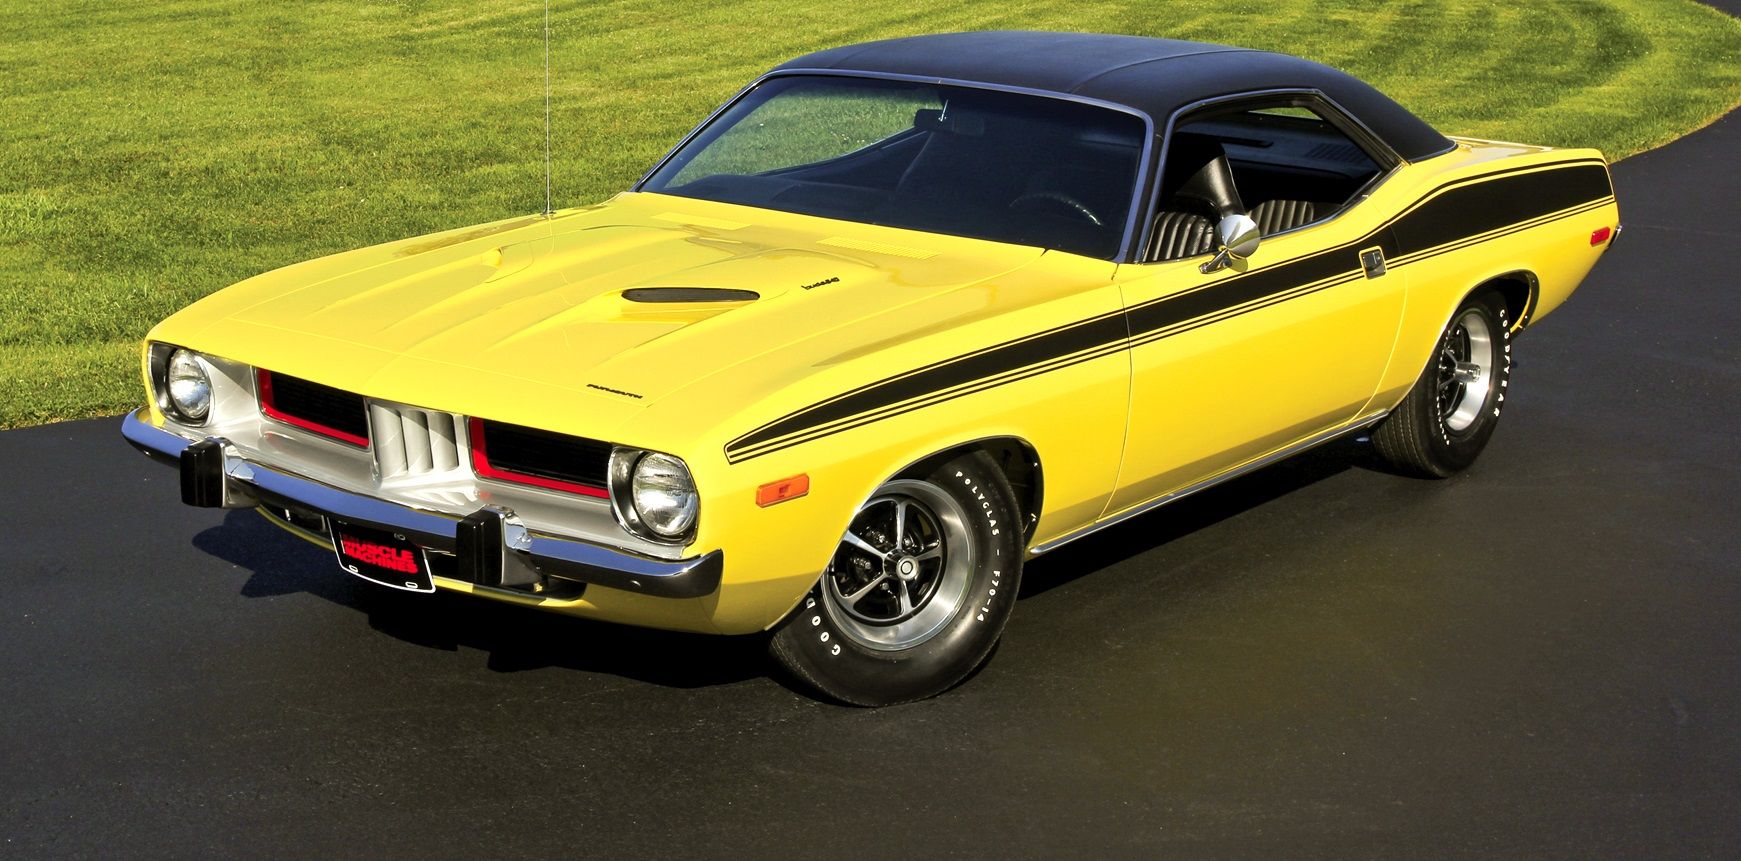 Dodge Plymouth Barracuda Muscle car 1973